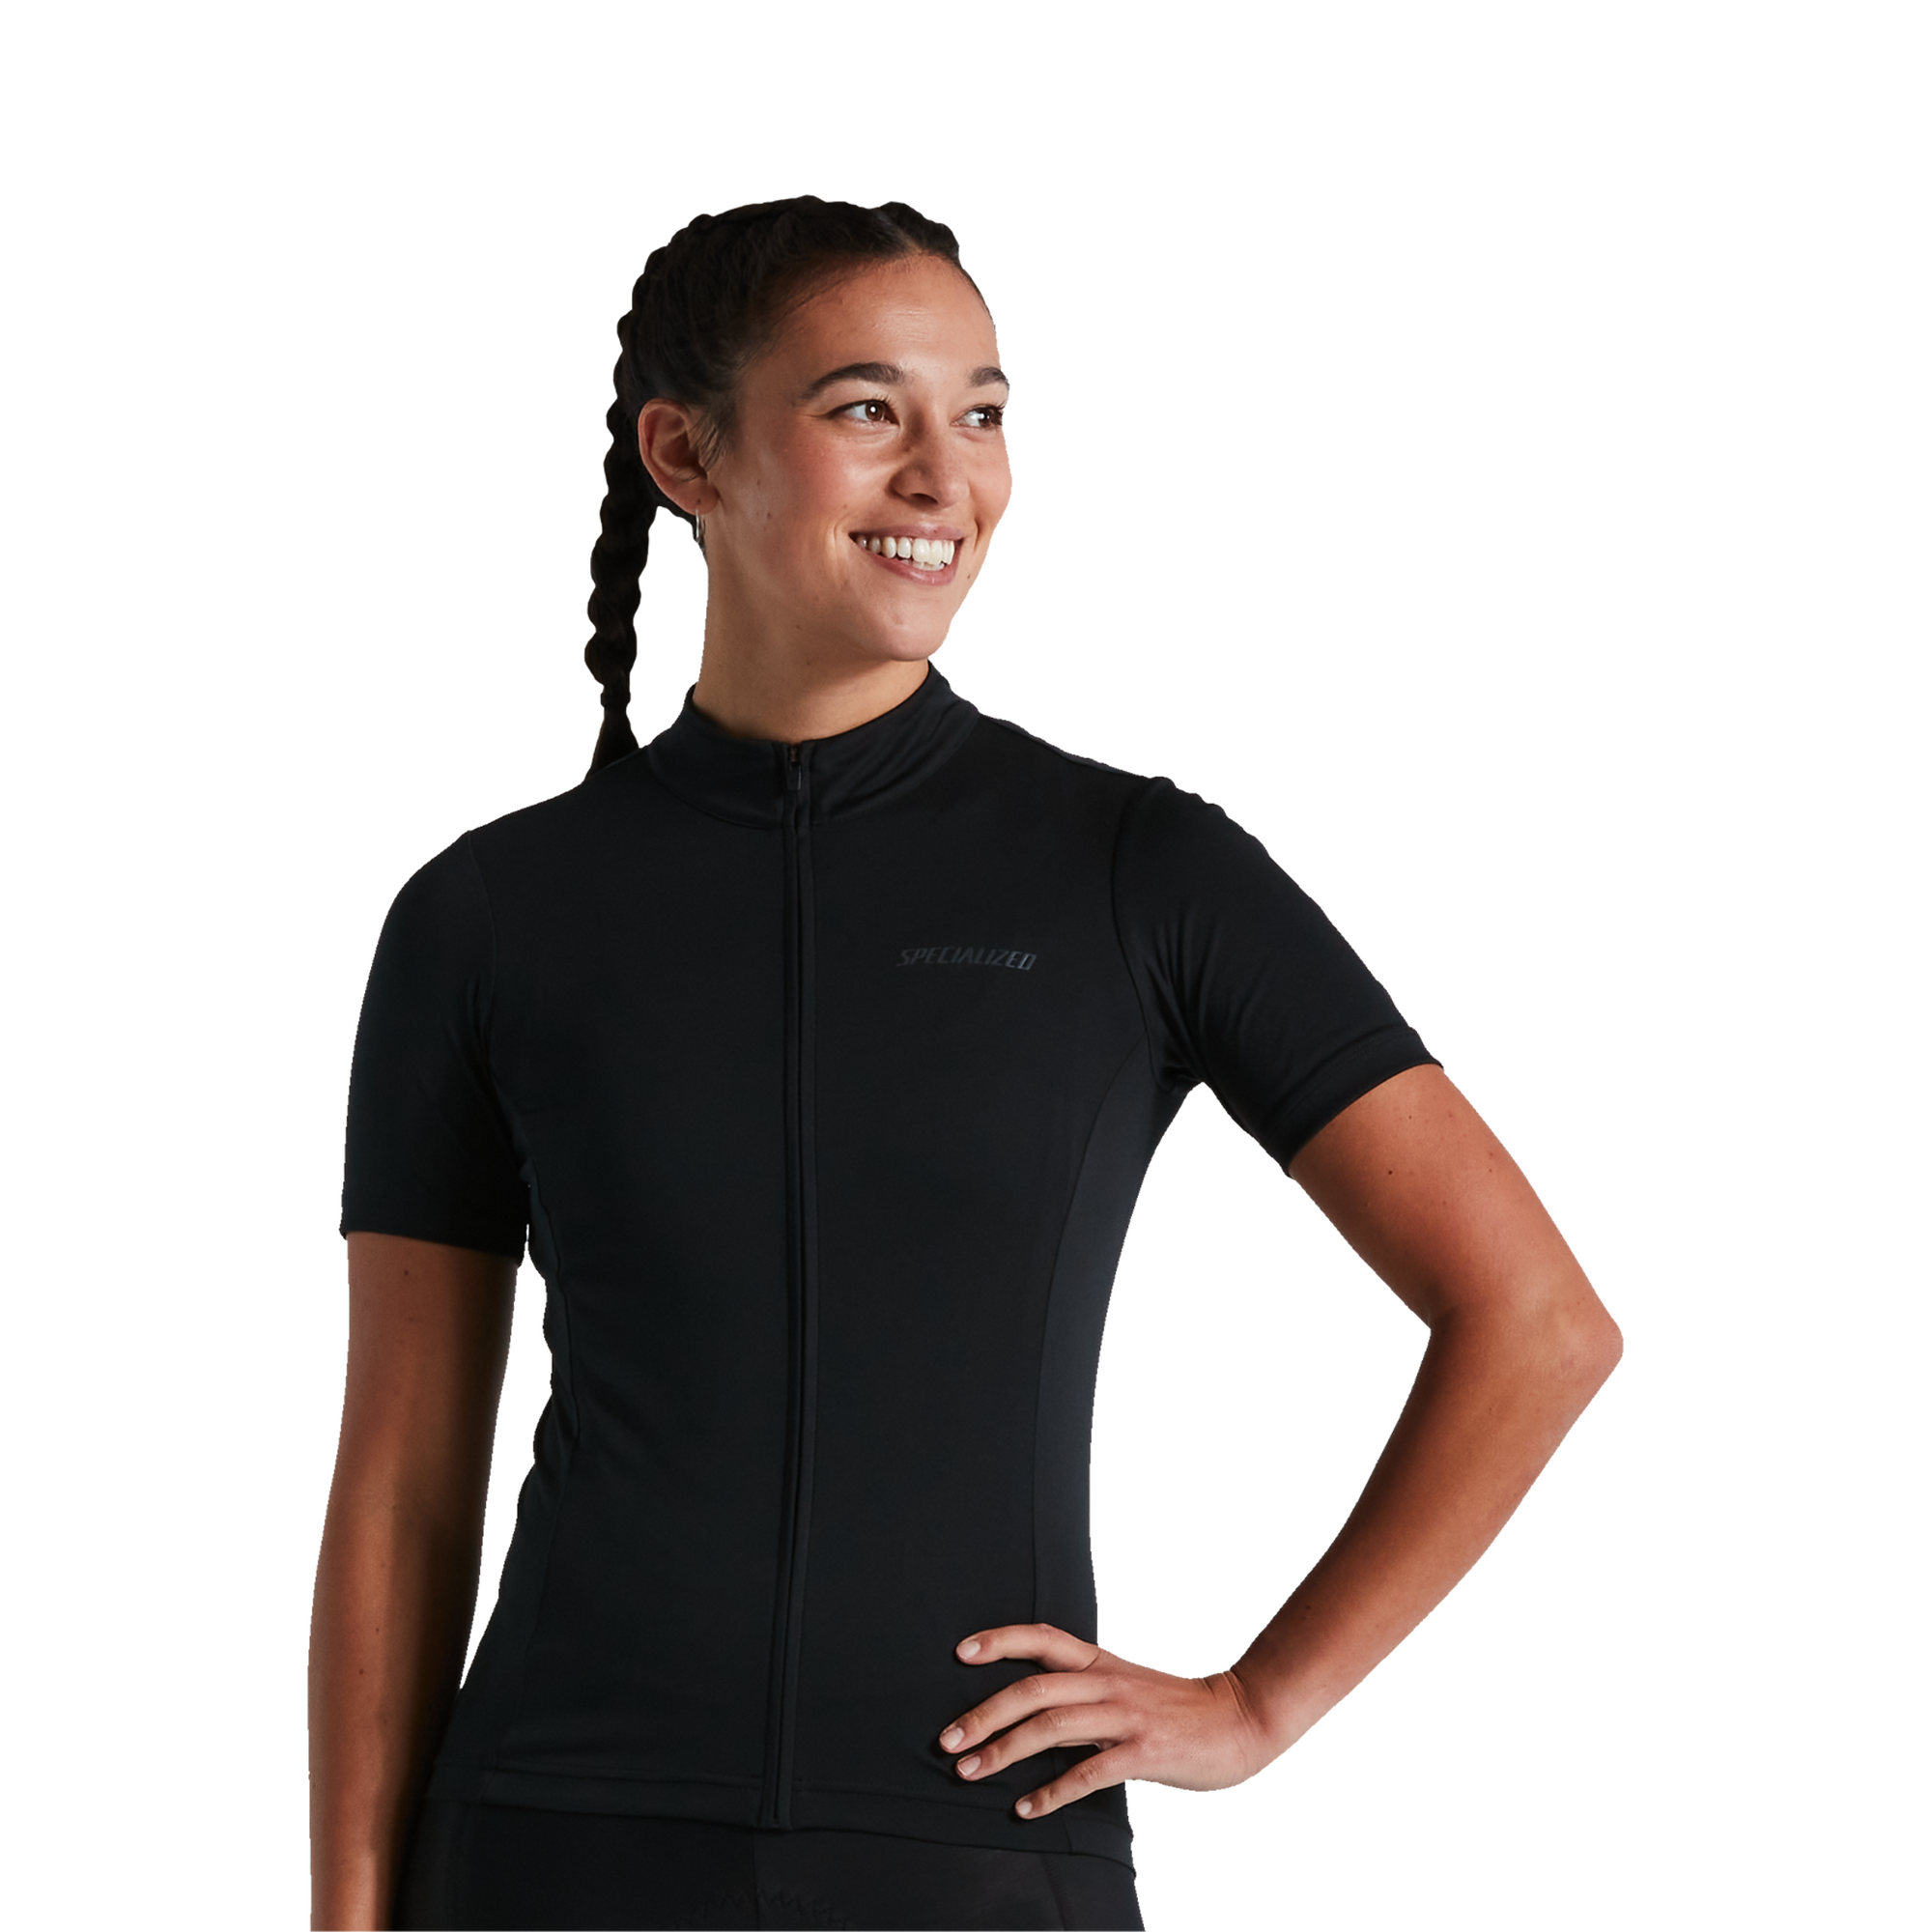 Maillot manches courtes Femme - RBX Classic